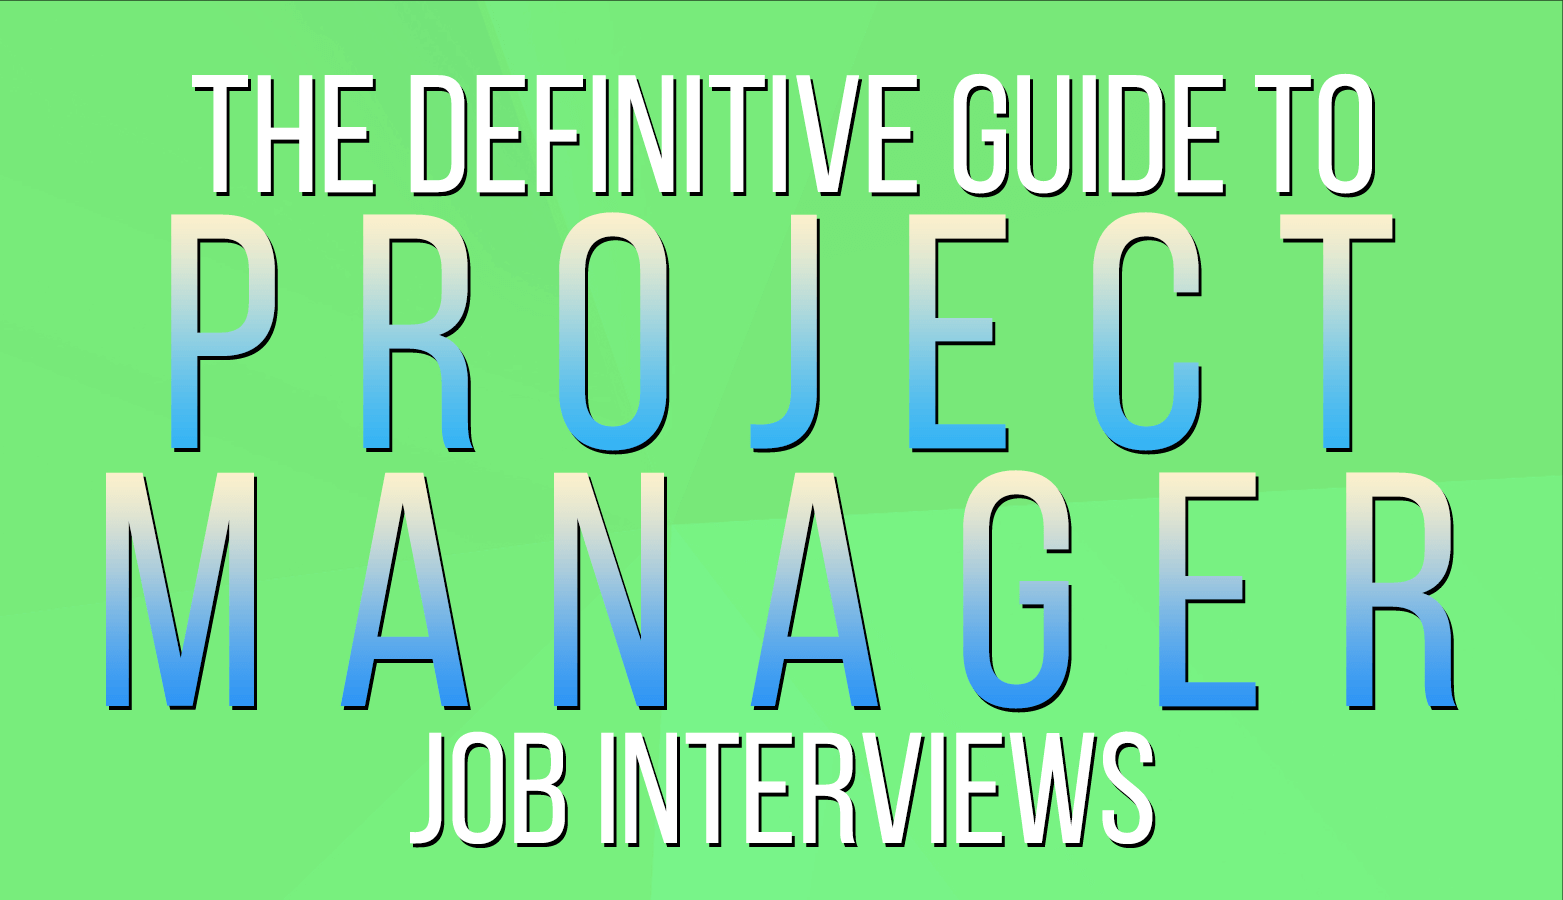 16240Product Manager Interview Guide, With The Most Recent Questions and Answers – 2023